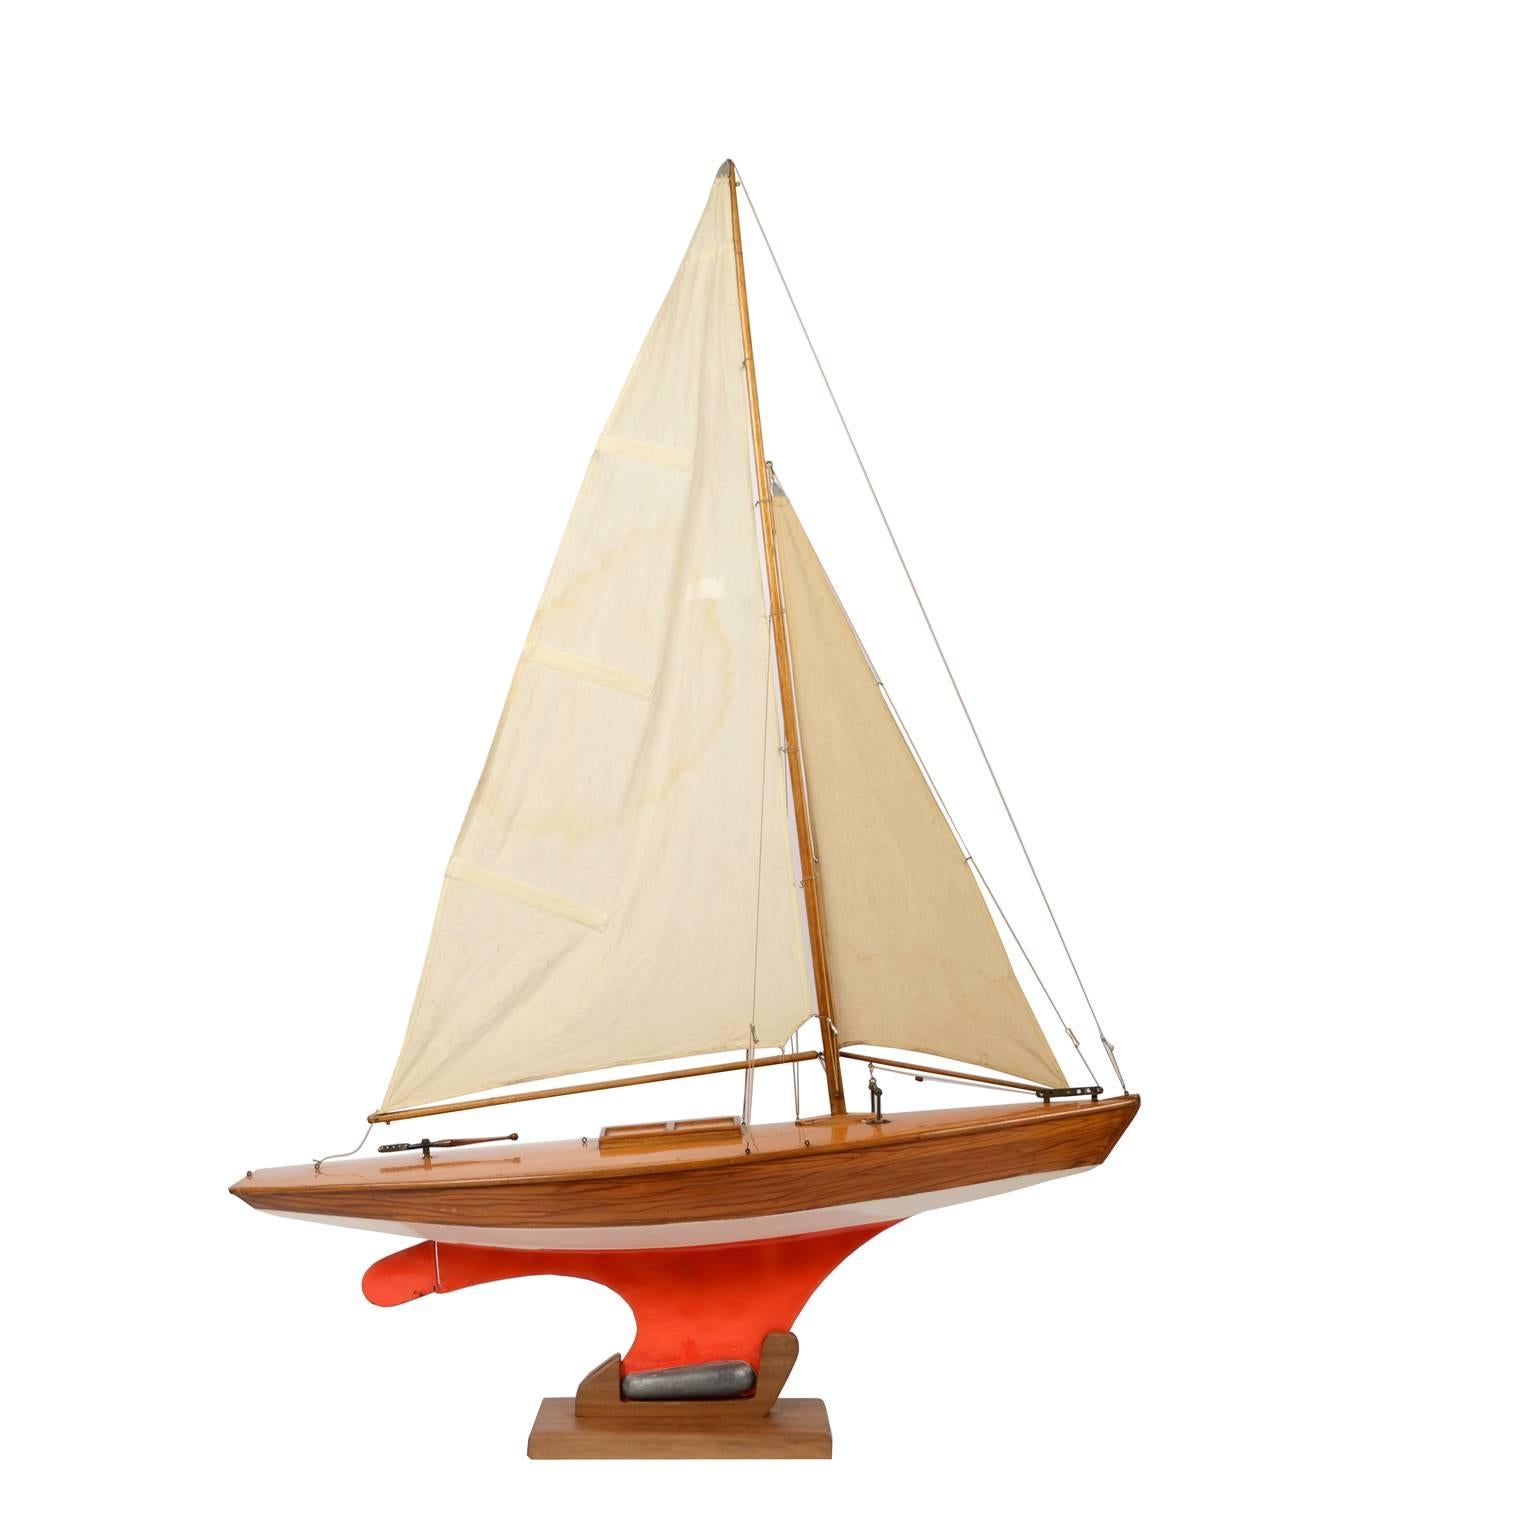 Pond Model on wooden base, red hull and lead ballast. This could be a model of yacht designed by the British naval architect Laurent Giles, made in the fifties of the last century. Very good condition. Measurements: 86 x 21 H 117.